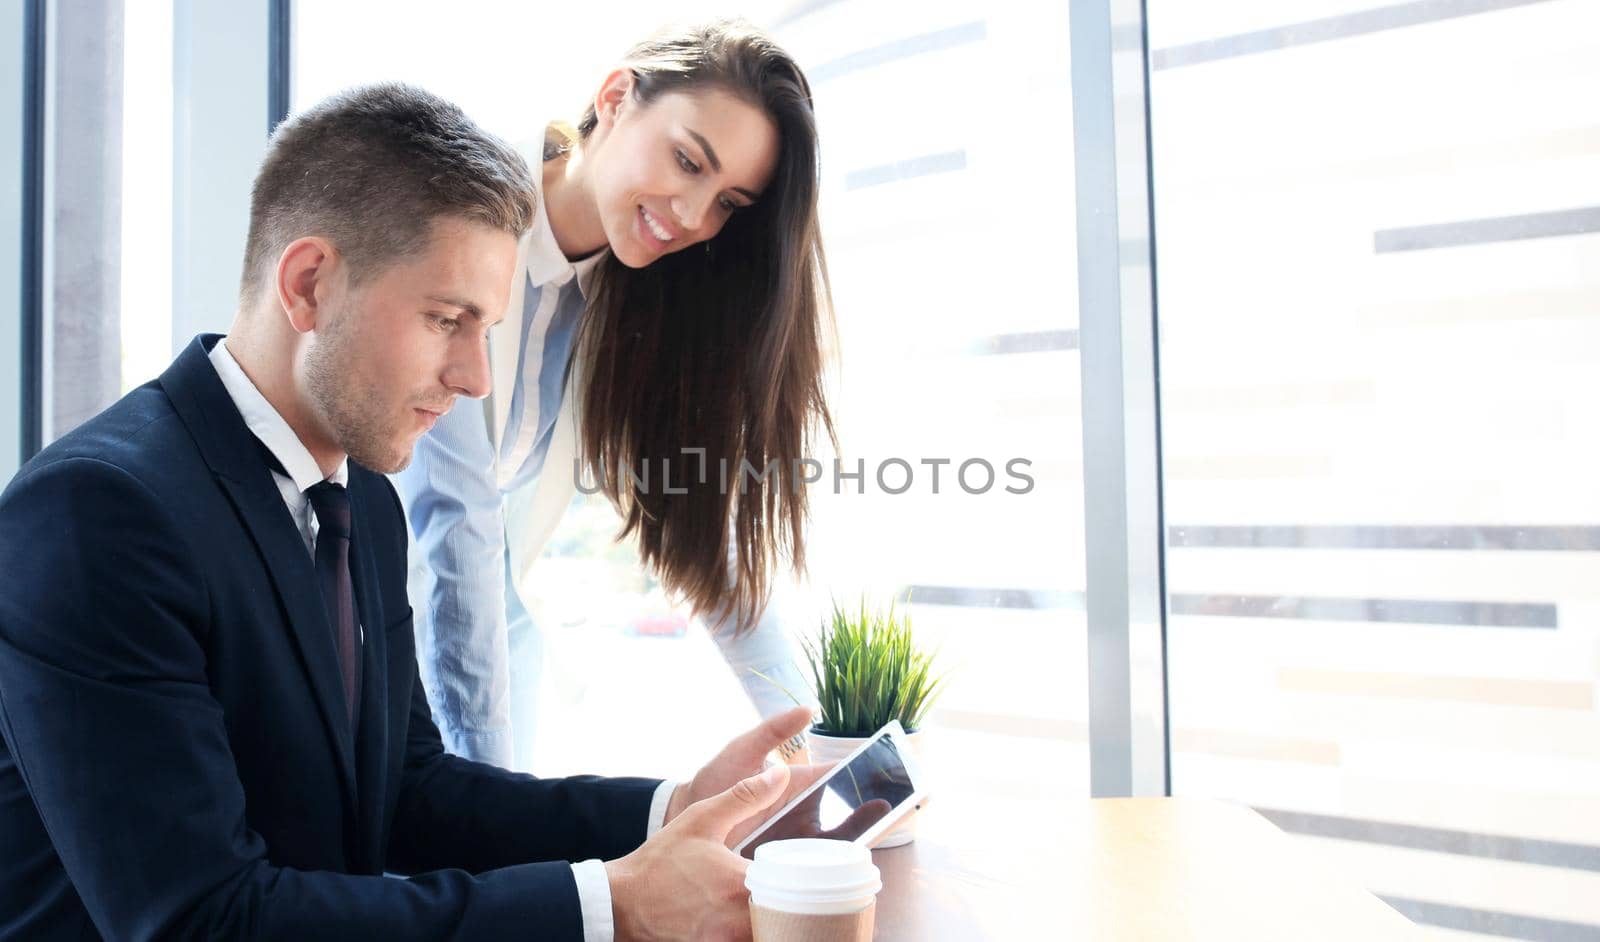 Image of two young business partners discussing plans or ideas at meeting by tsyhun